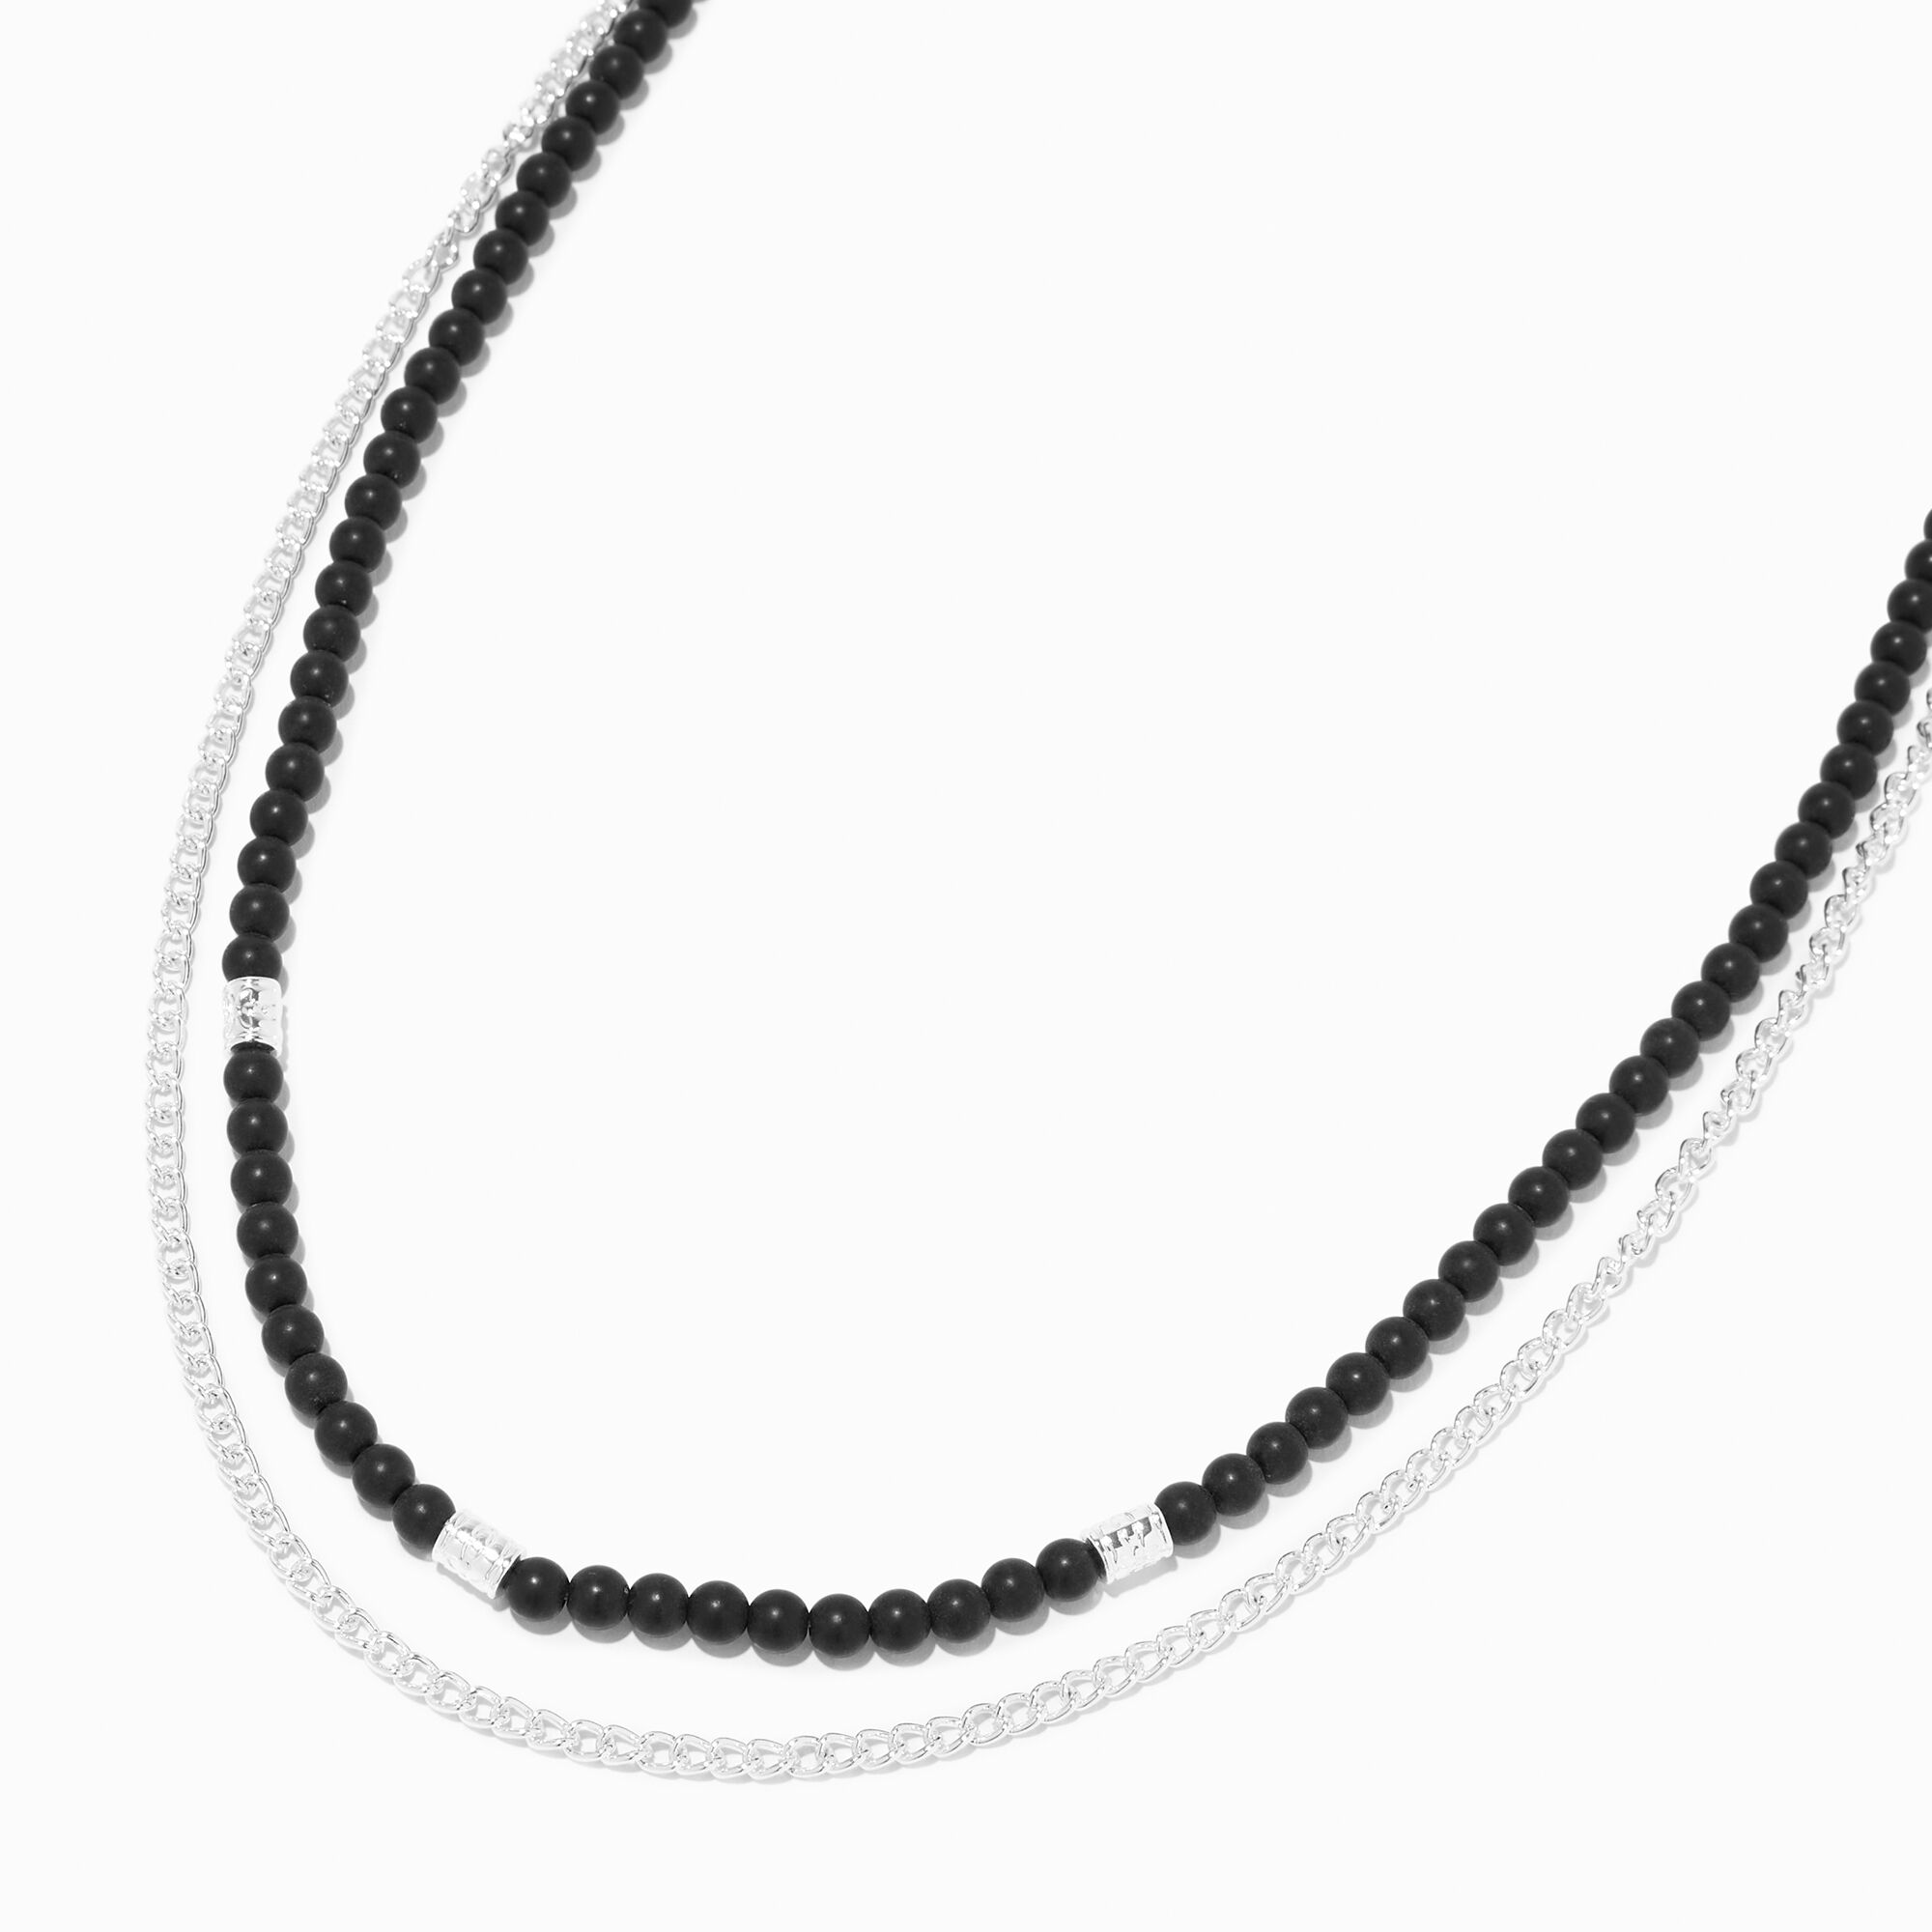 View Claires SilverTone Curb Chain Beaded MultiStrand Necklace Black information